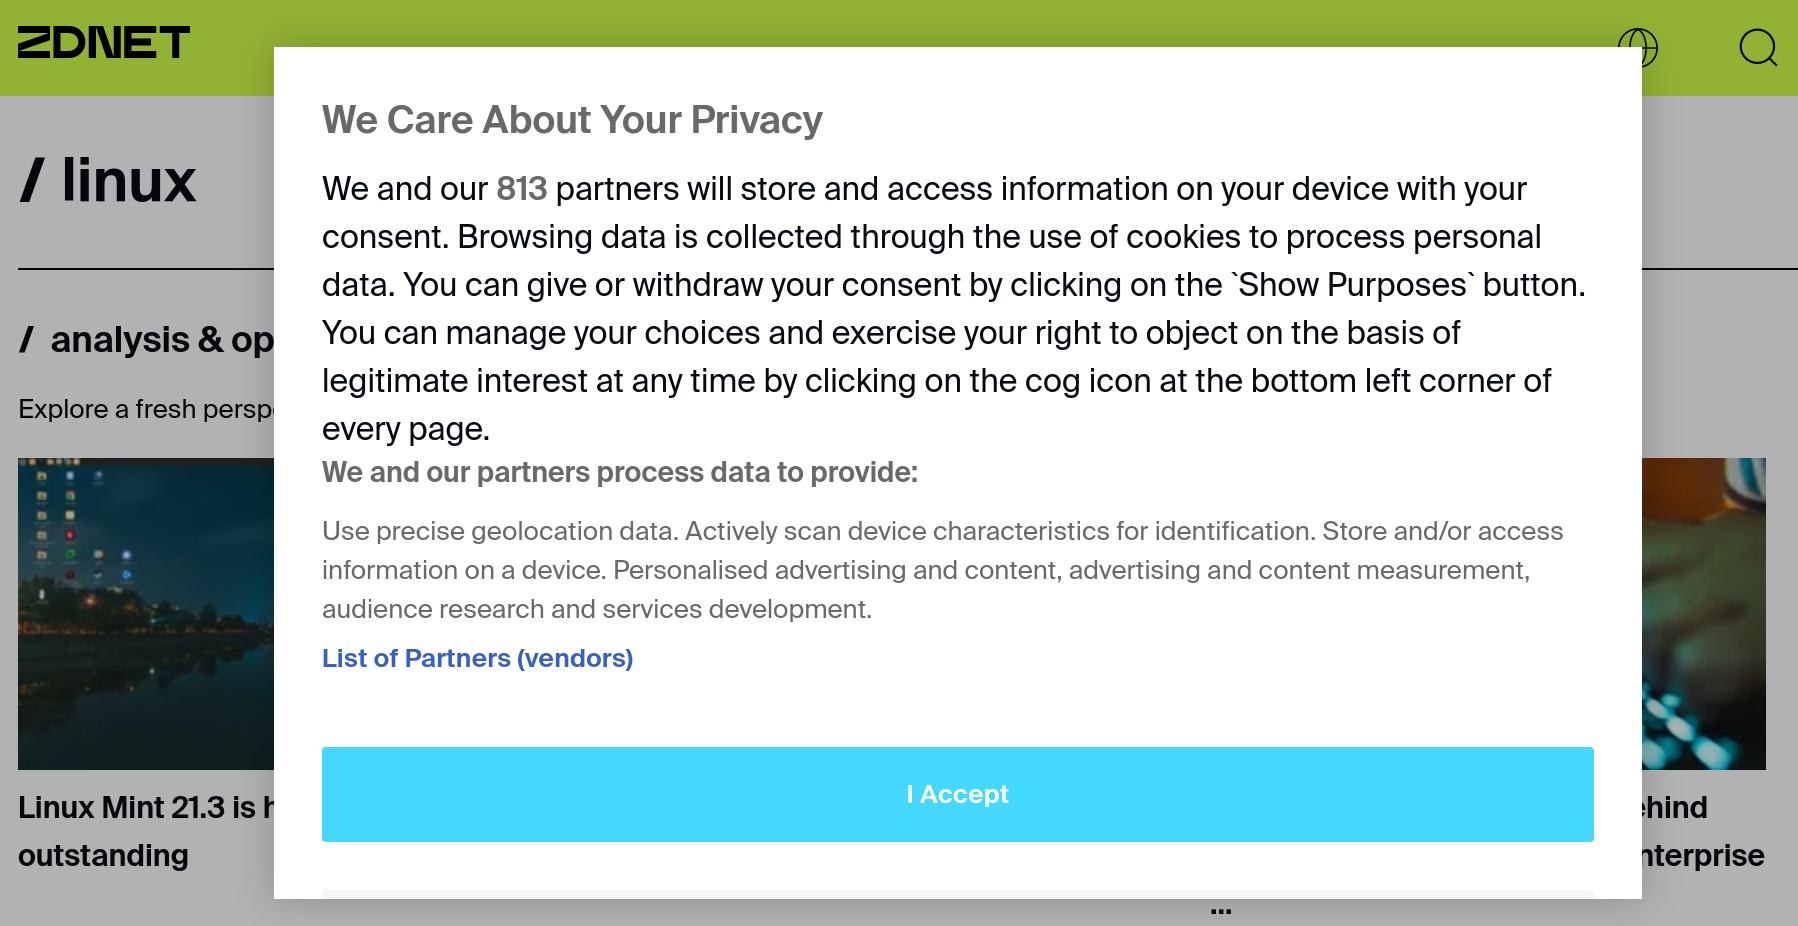 We and our 813 partners will store and access information on your device with your consent. Browsing data is collected through the use of cookies to process personal data. You can give or withdraw your consent by clicking on the `Show Purposes` button. You can manage your choices and exercise your right to object on the basis of legitimate interest at any time by clicking on the cog icon at the bottom left corner of every page.